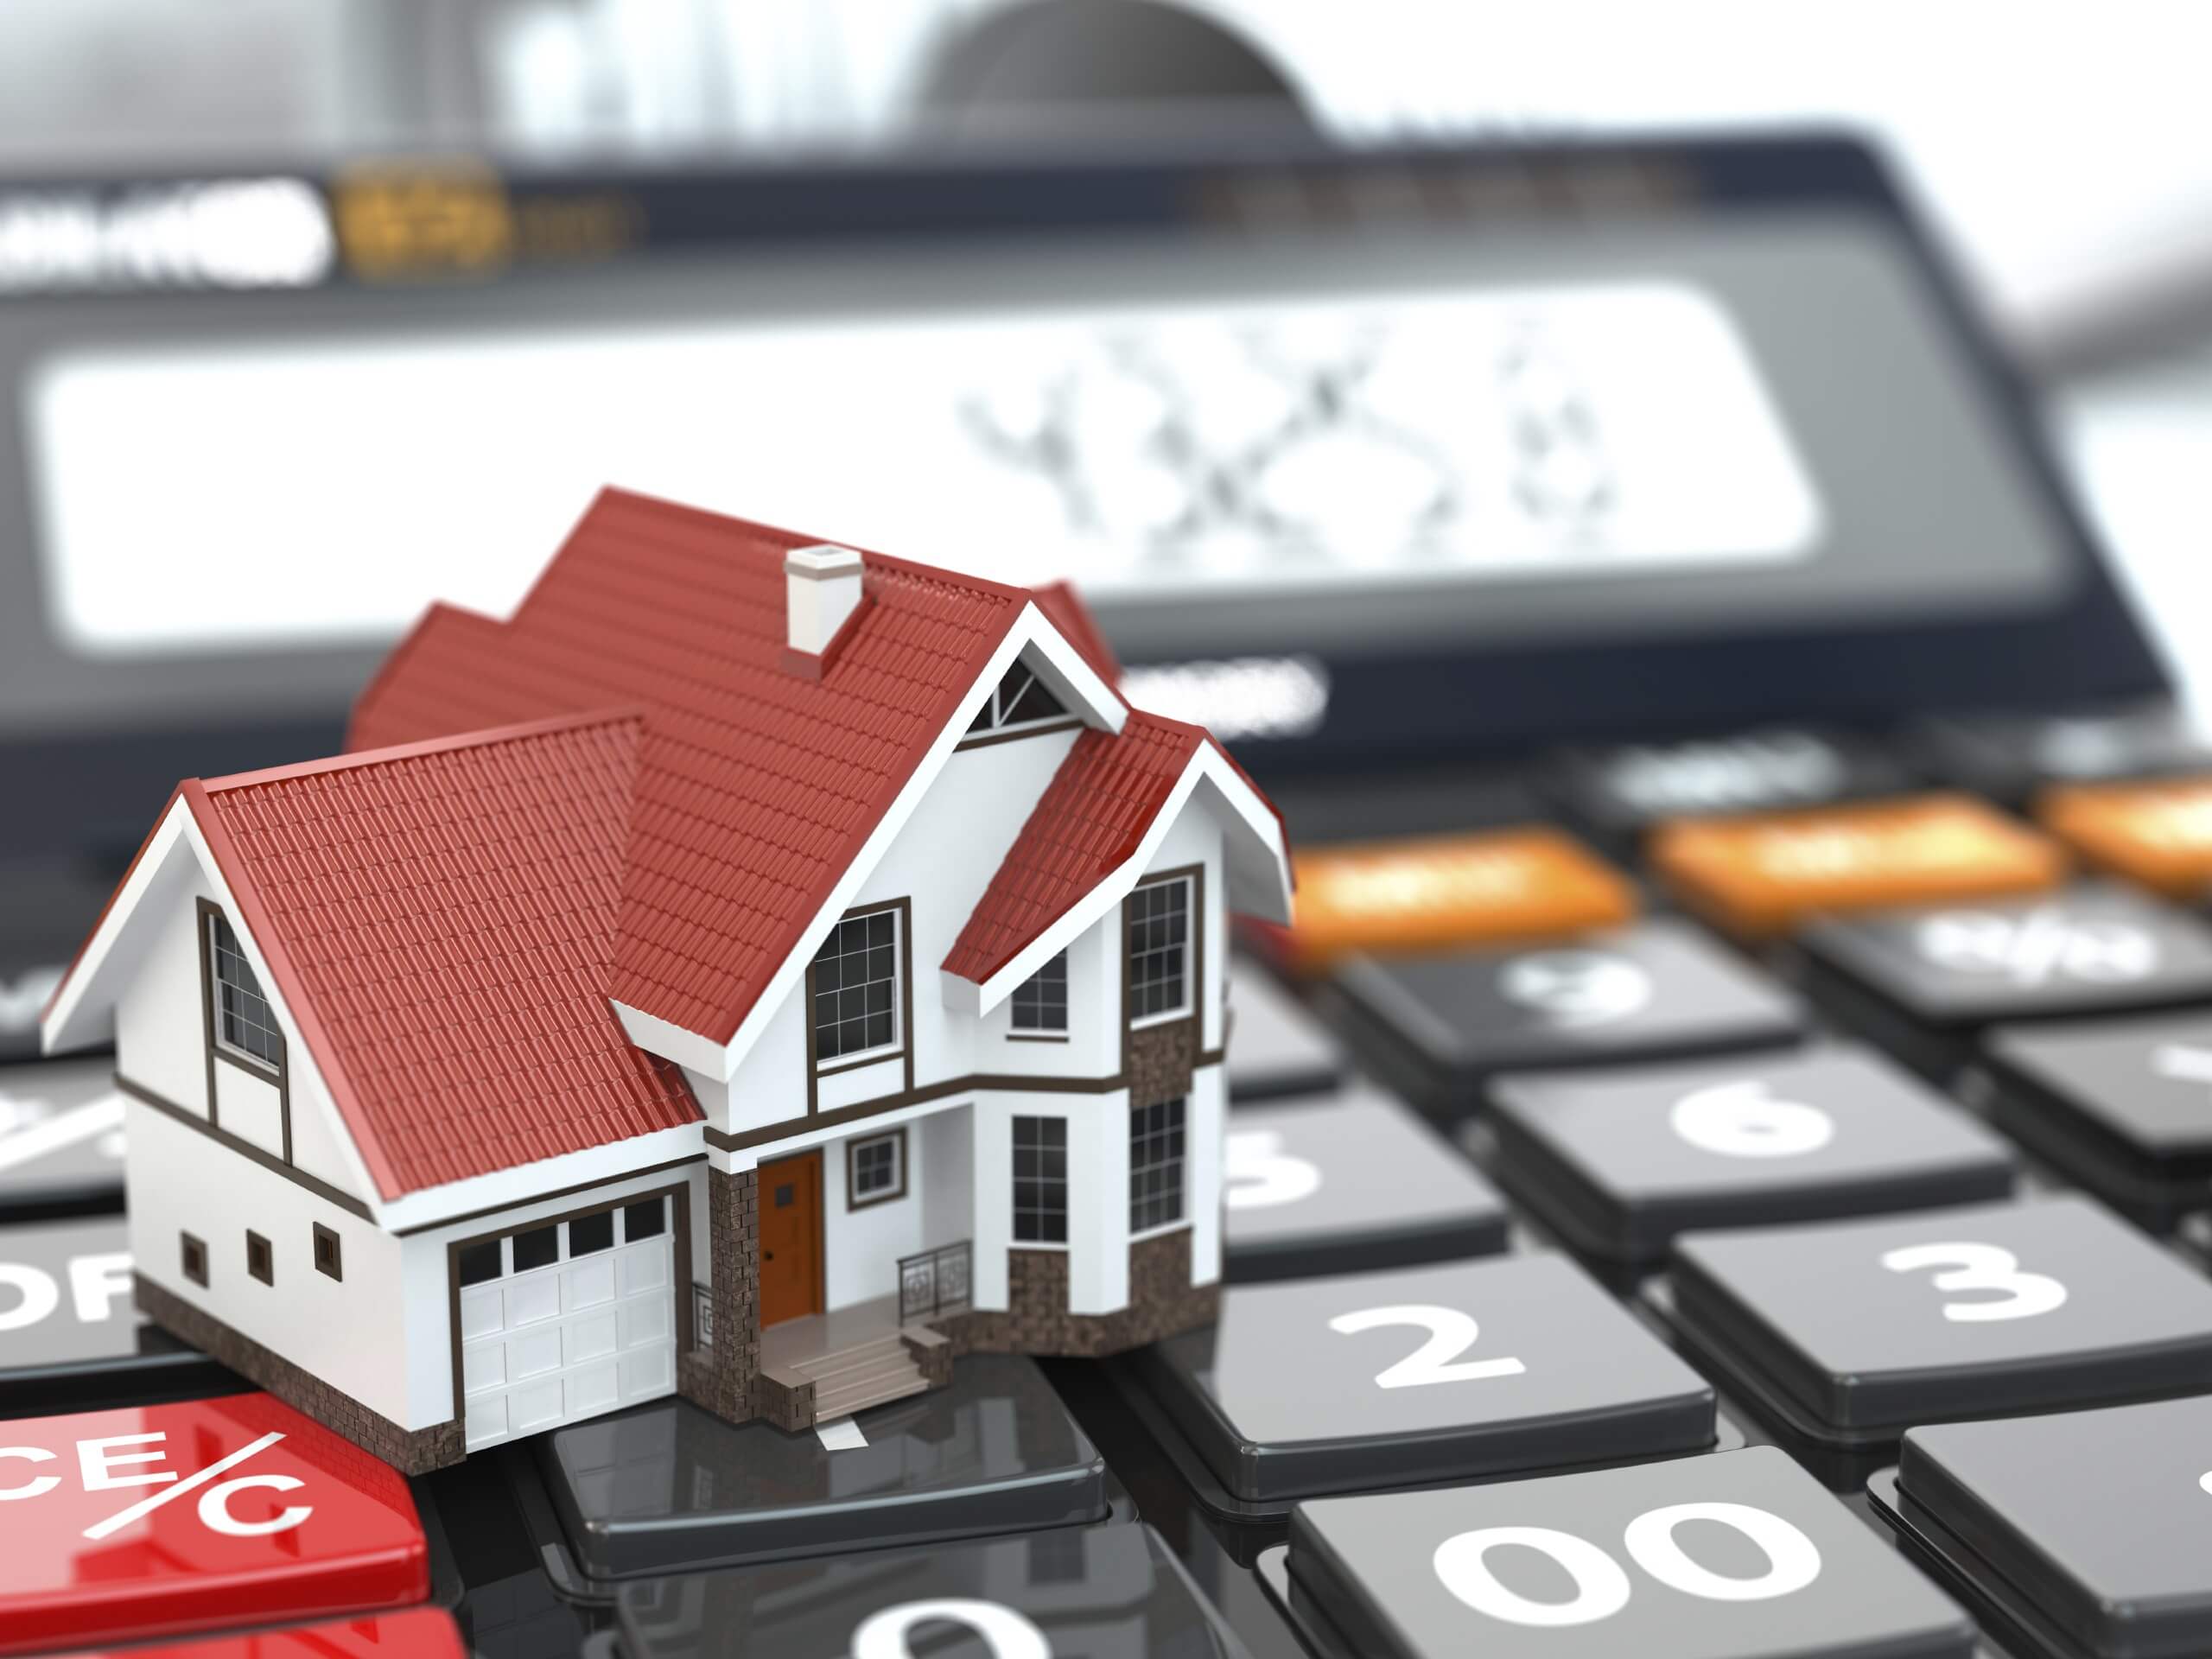 House-on-Mortgage-calculator_Large